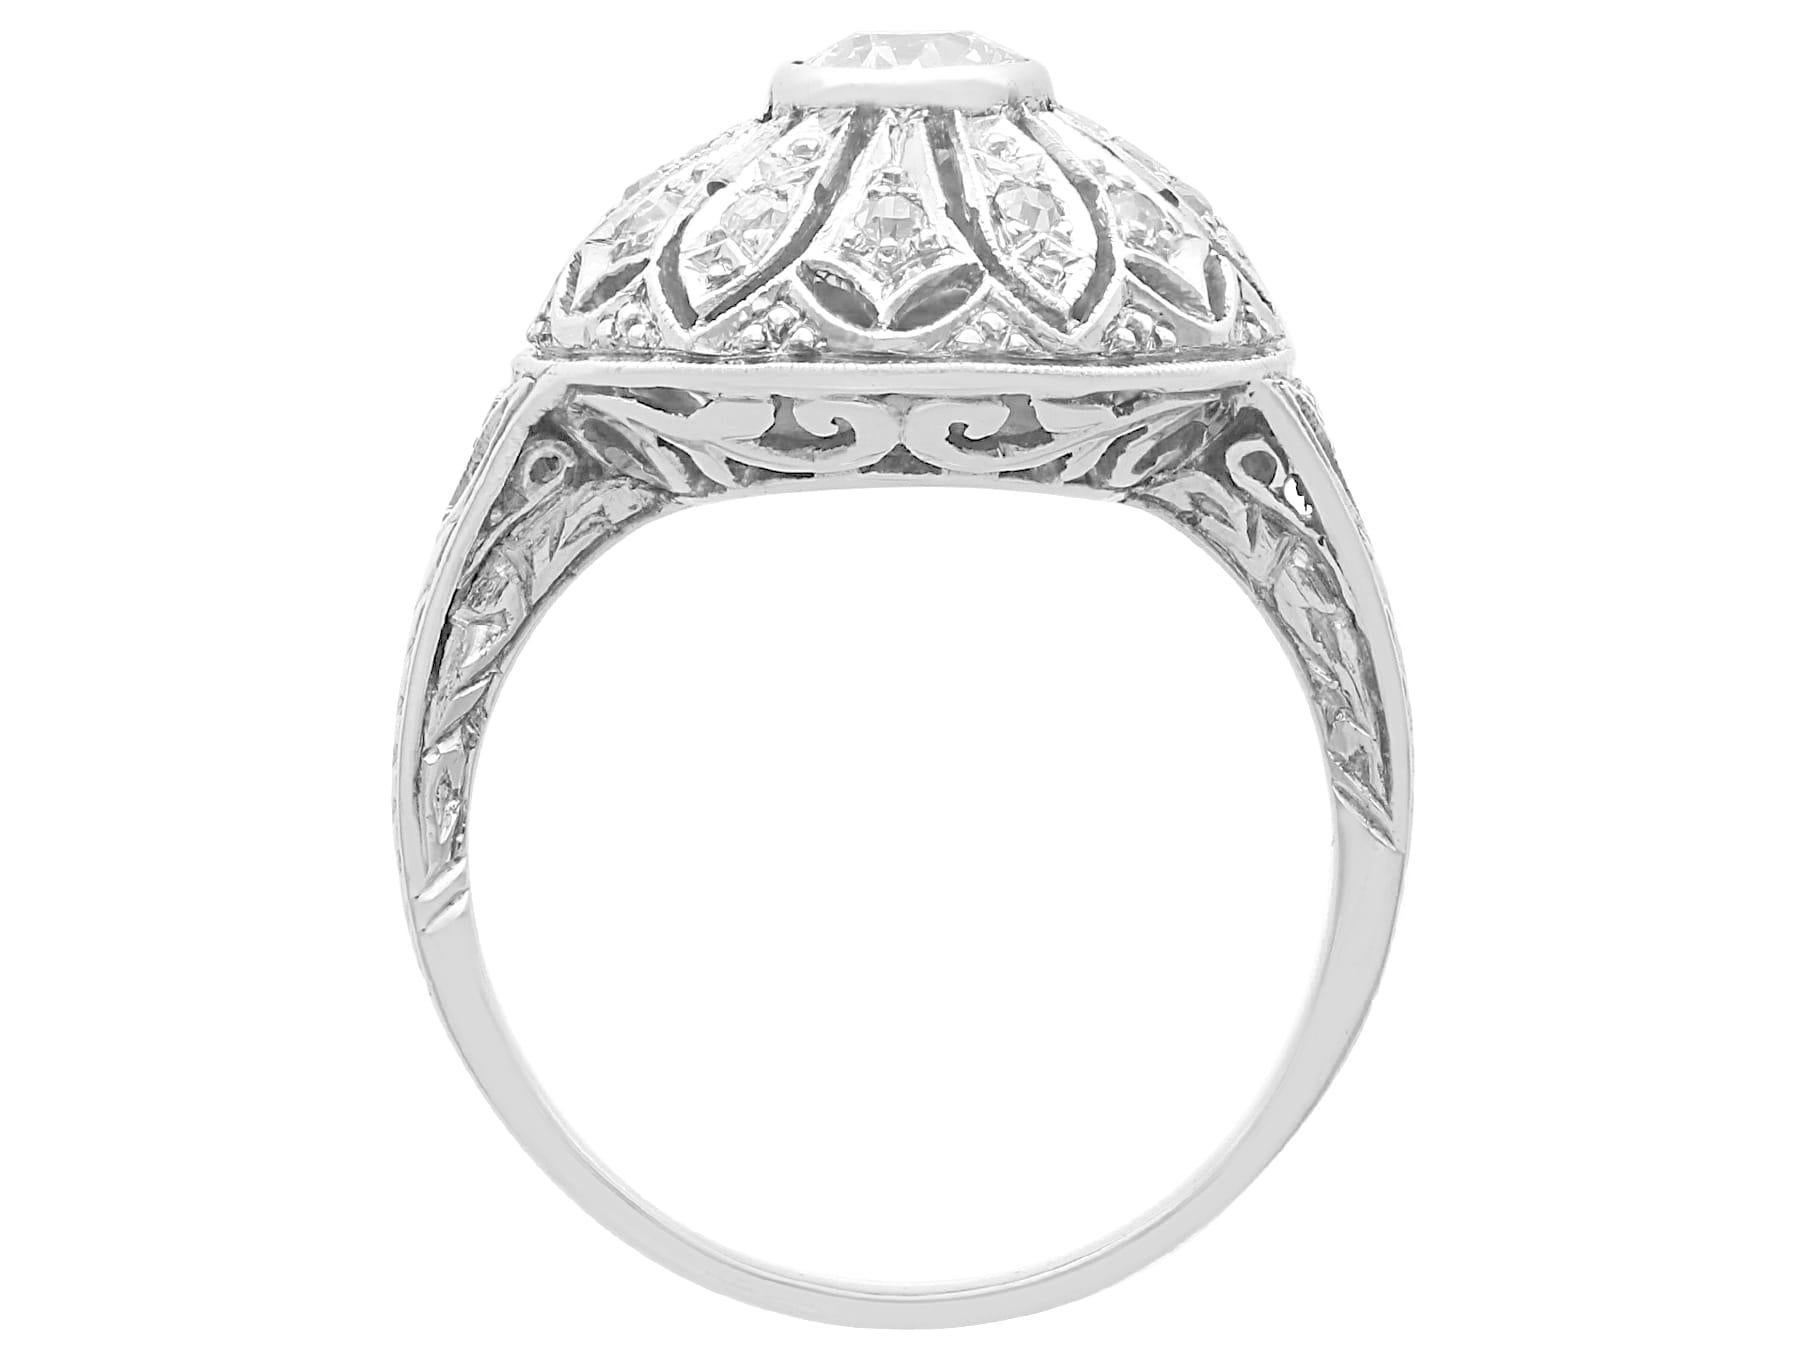 Antique 1920s 0.57 Carat Diamond and 14k White Gold Art Deco Cocktail Ring  For Sale 2